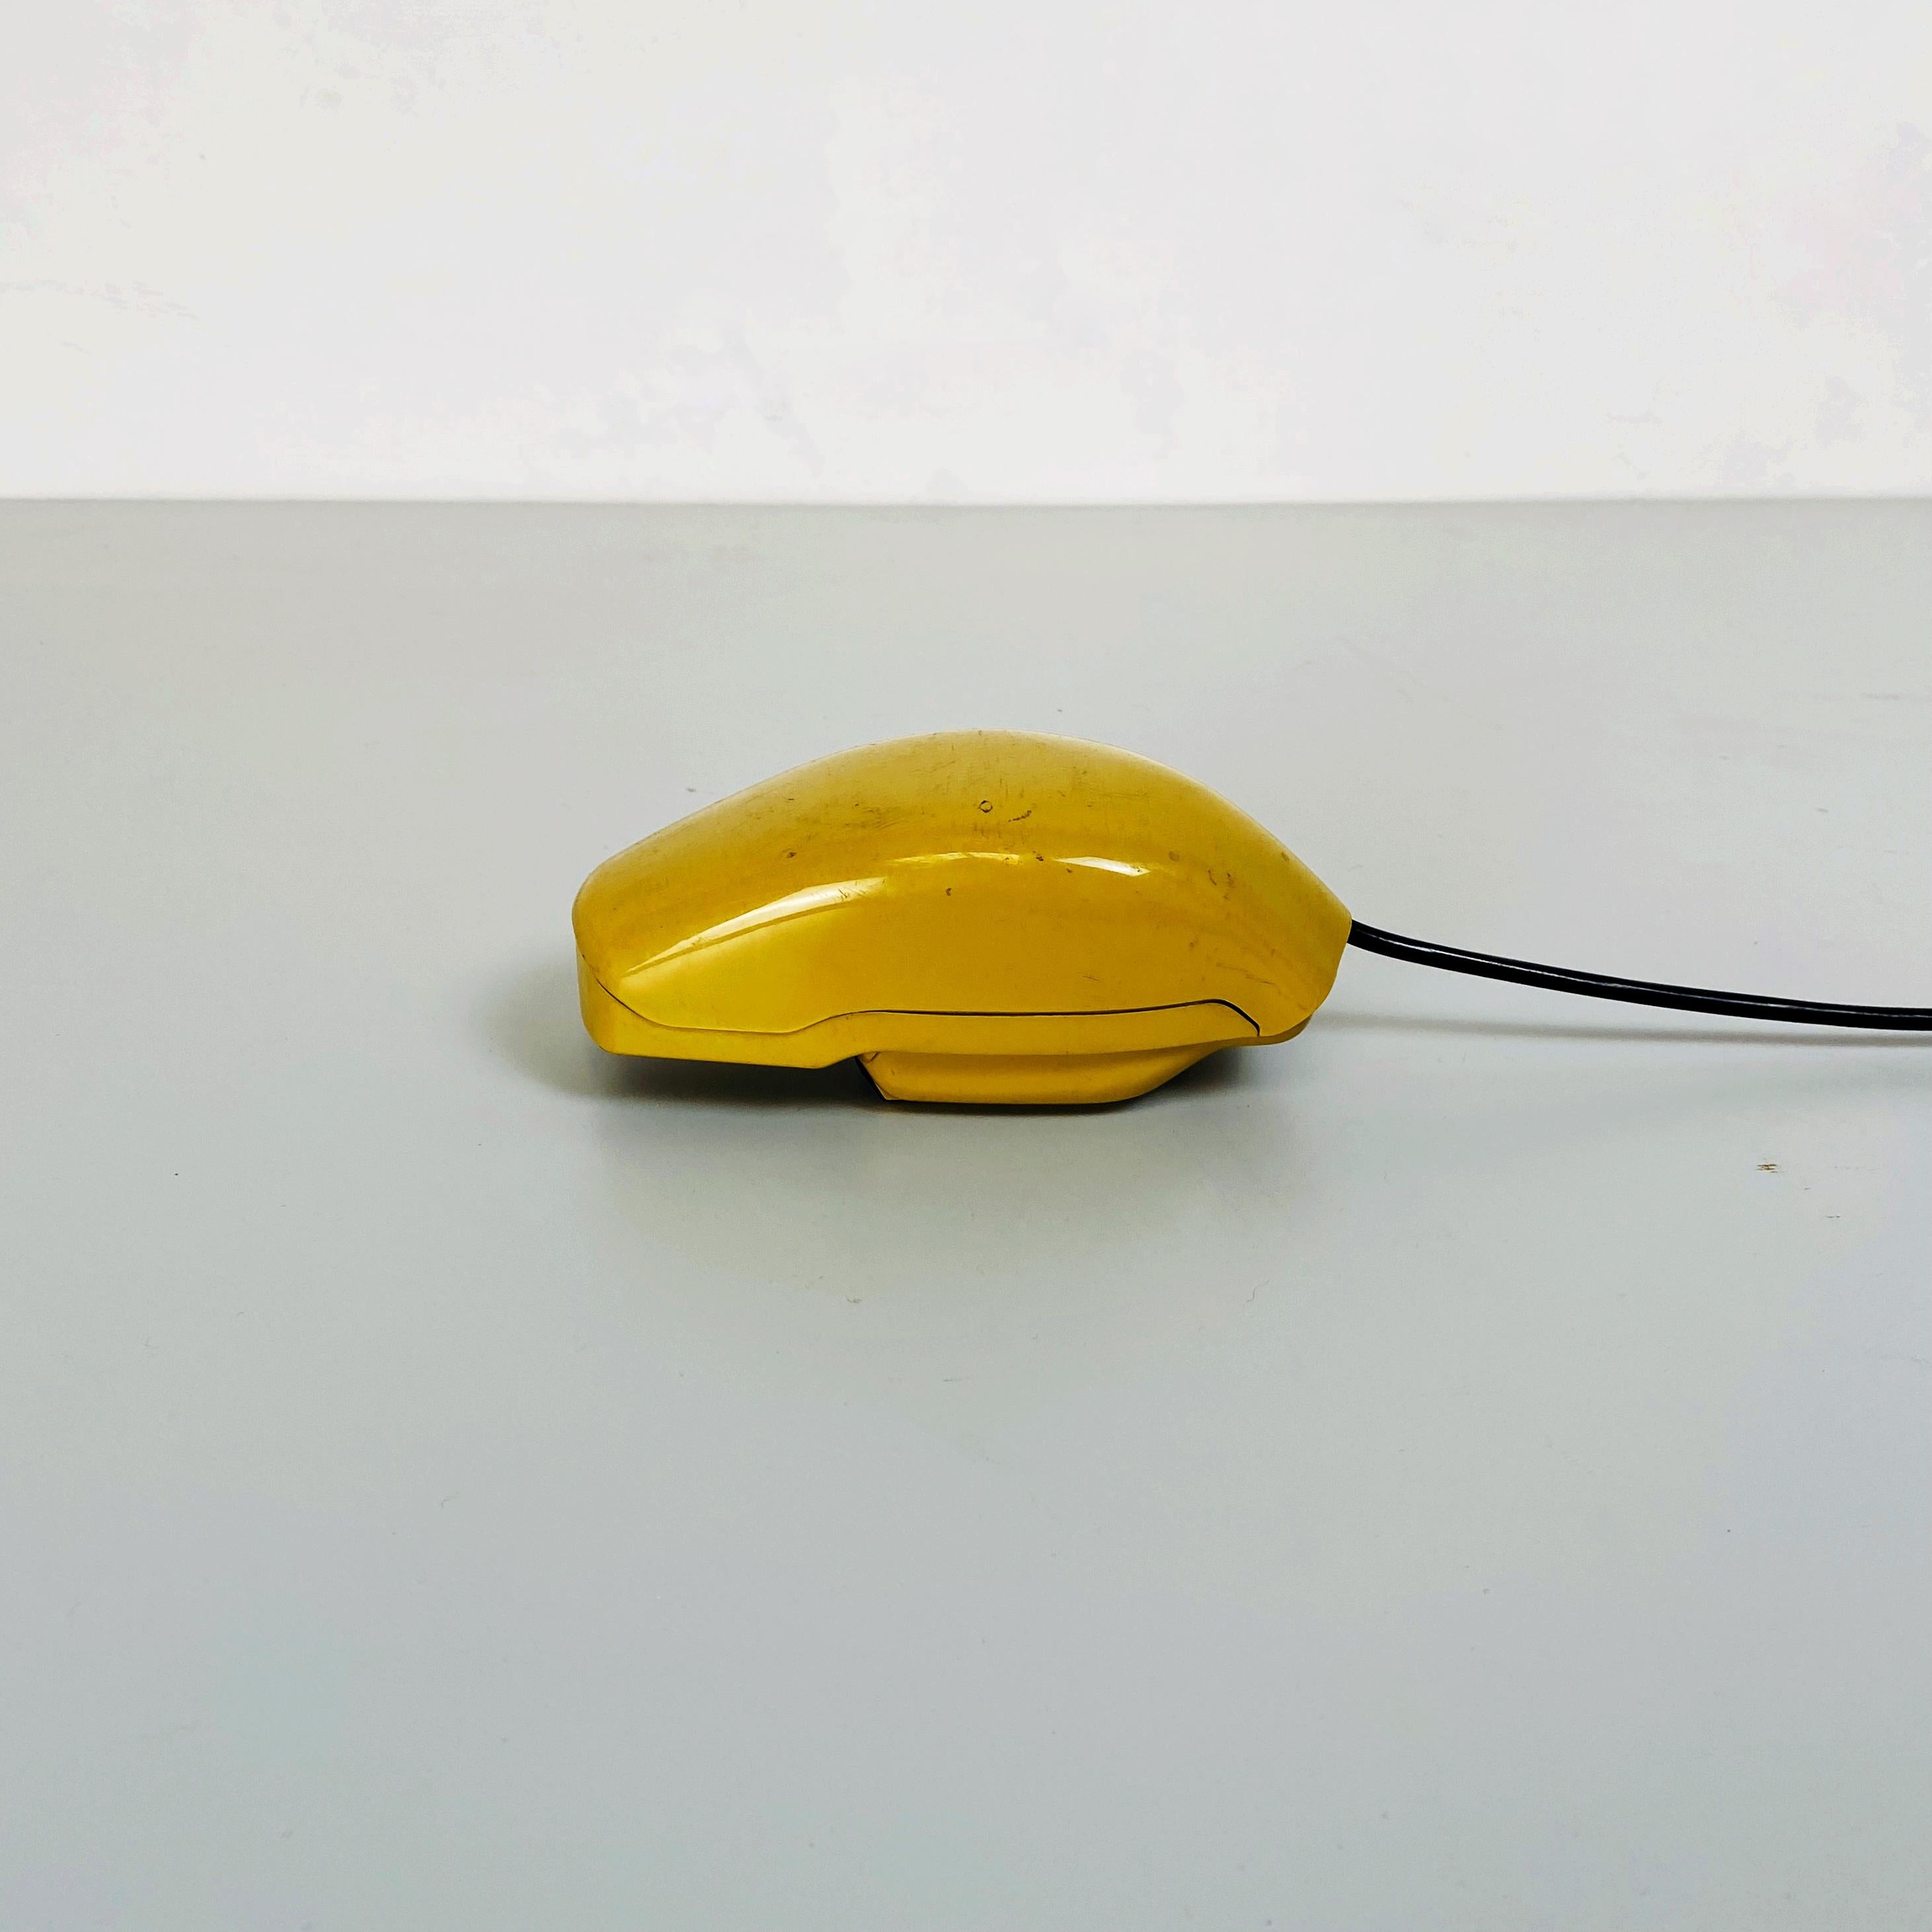 Yellow telephone Grillo by Marco Zanuso and Richard Sapper for Siemens, 1965
Grillo telephone produced in 1965 for Siemens to a design by Marco Zanuso and Richard Sapper. The Telephone won the Compasso d'Oro in 1967 for functionality and